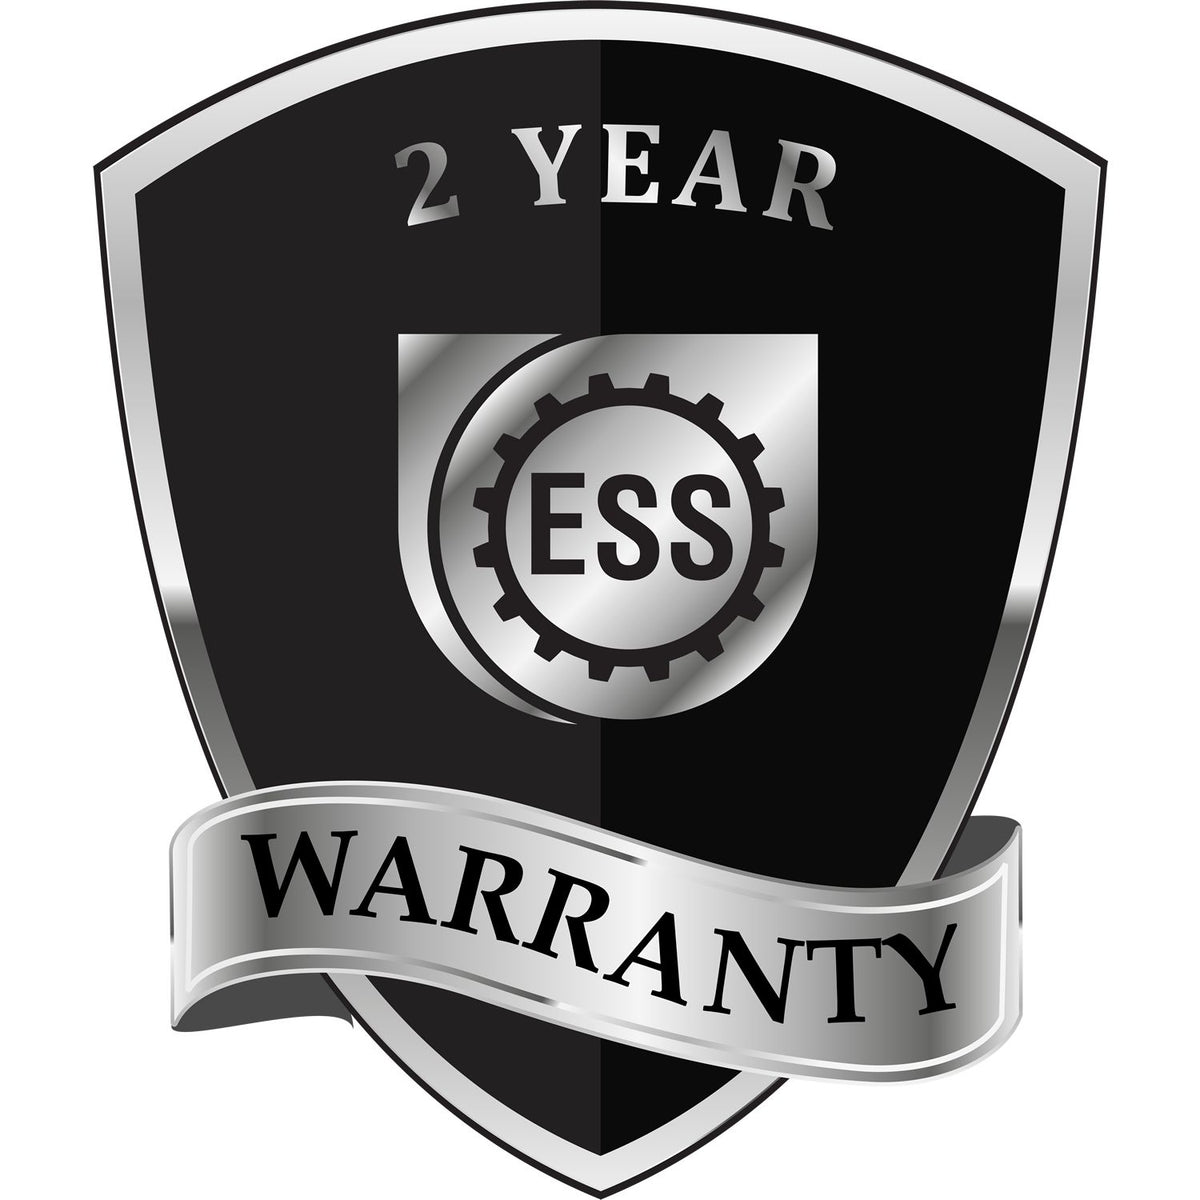 A black and silver badge or emblem showing warranty information for the Hybrid Louisiana Land Surveyor Seal